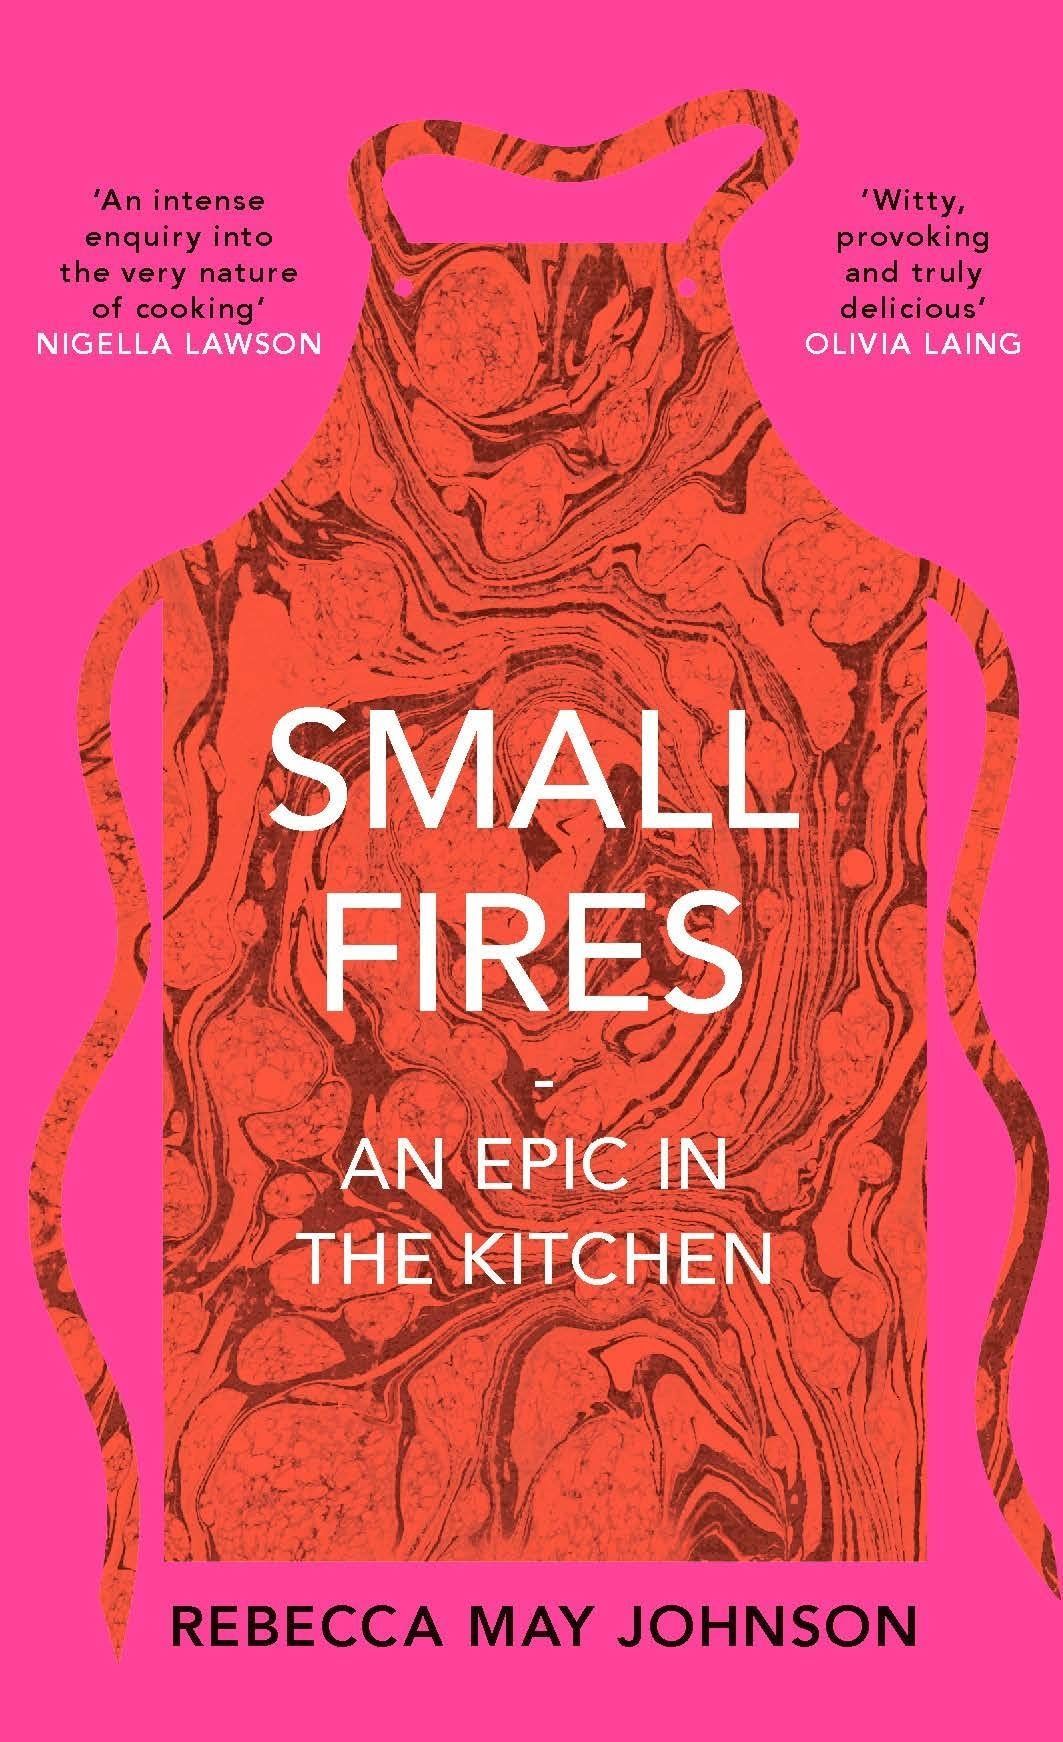 A Single Dish a Thousand Times: On Rebecca May Johnson's “Small Fires”